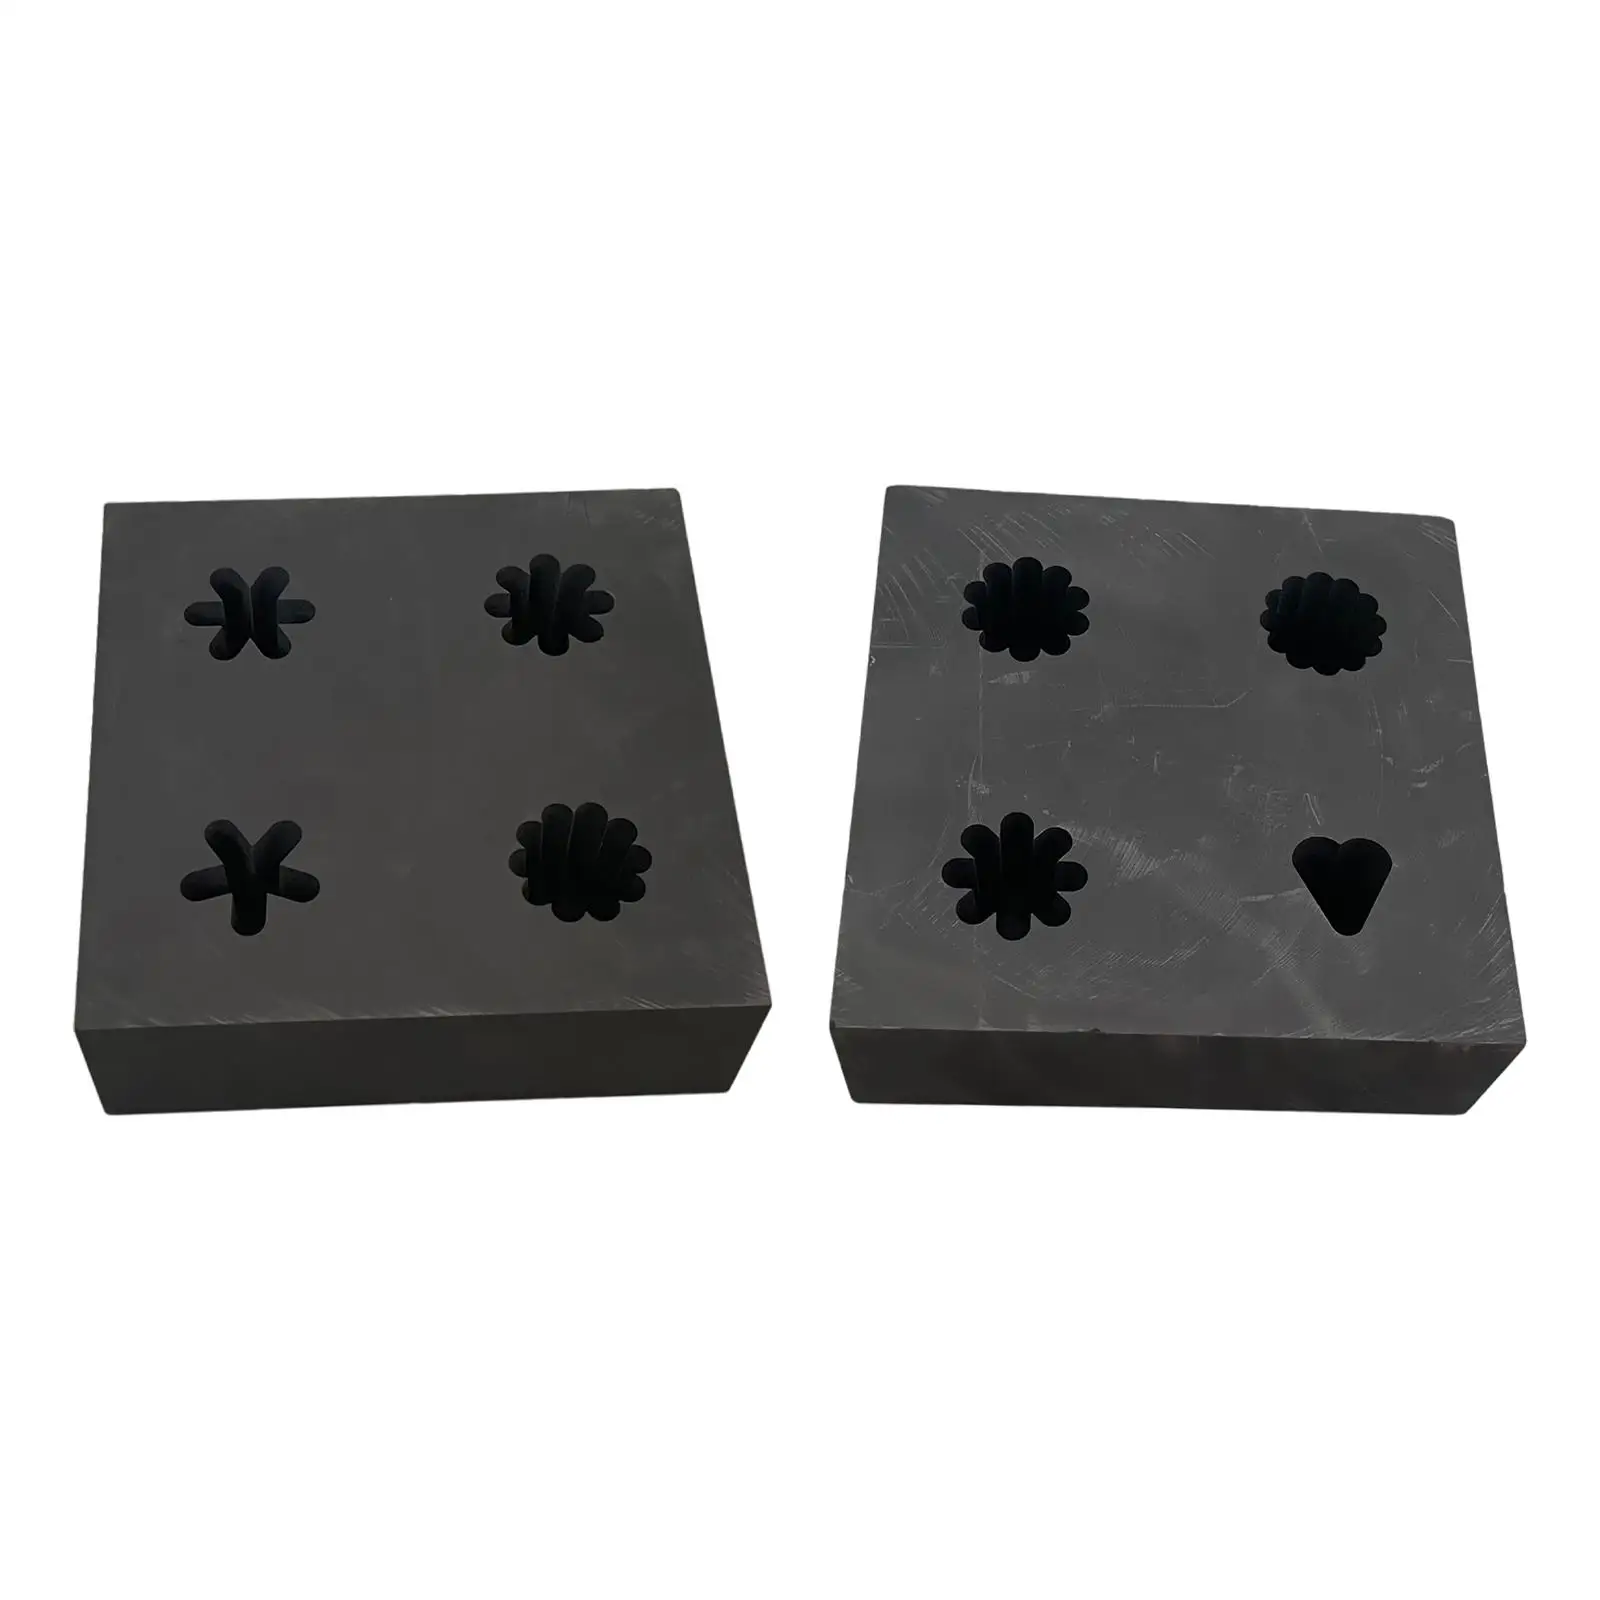 Flower Shapes Graphite Ingot Mold Gold Silver Scrap Casting Mould Combo for Precious Metal Brass Alloy Aluminum Molds Tool